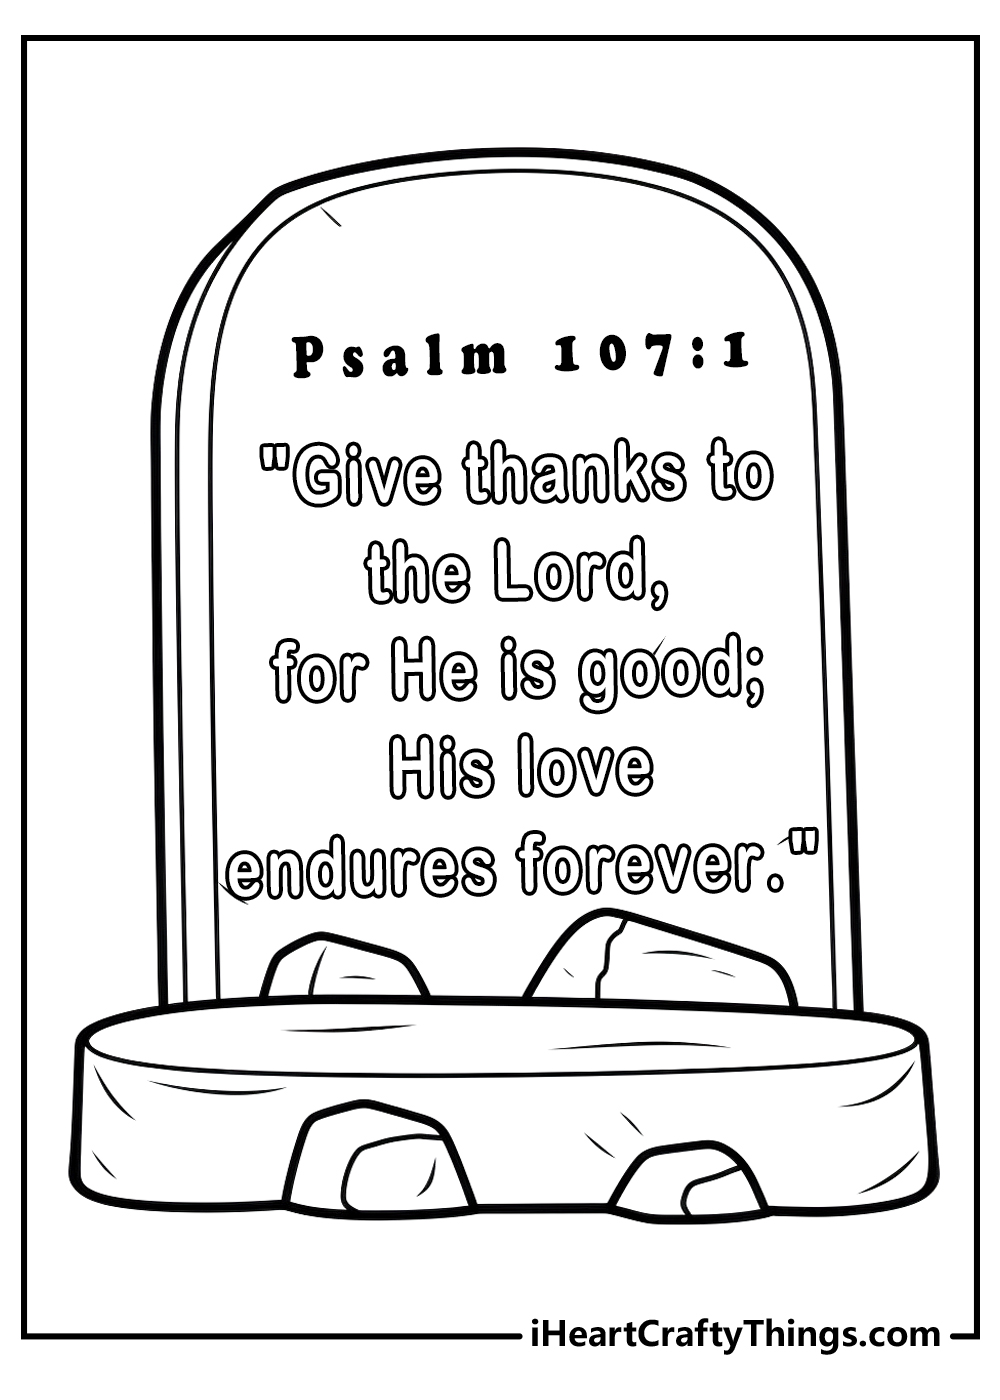 new bible verse coloring printable